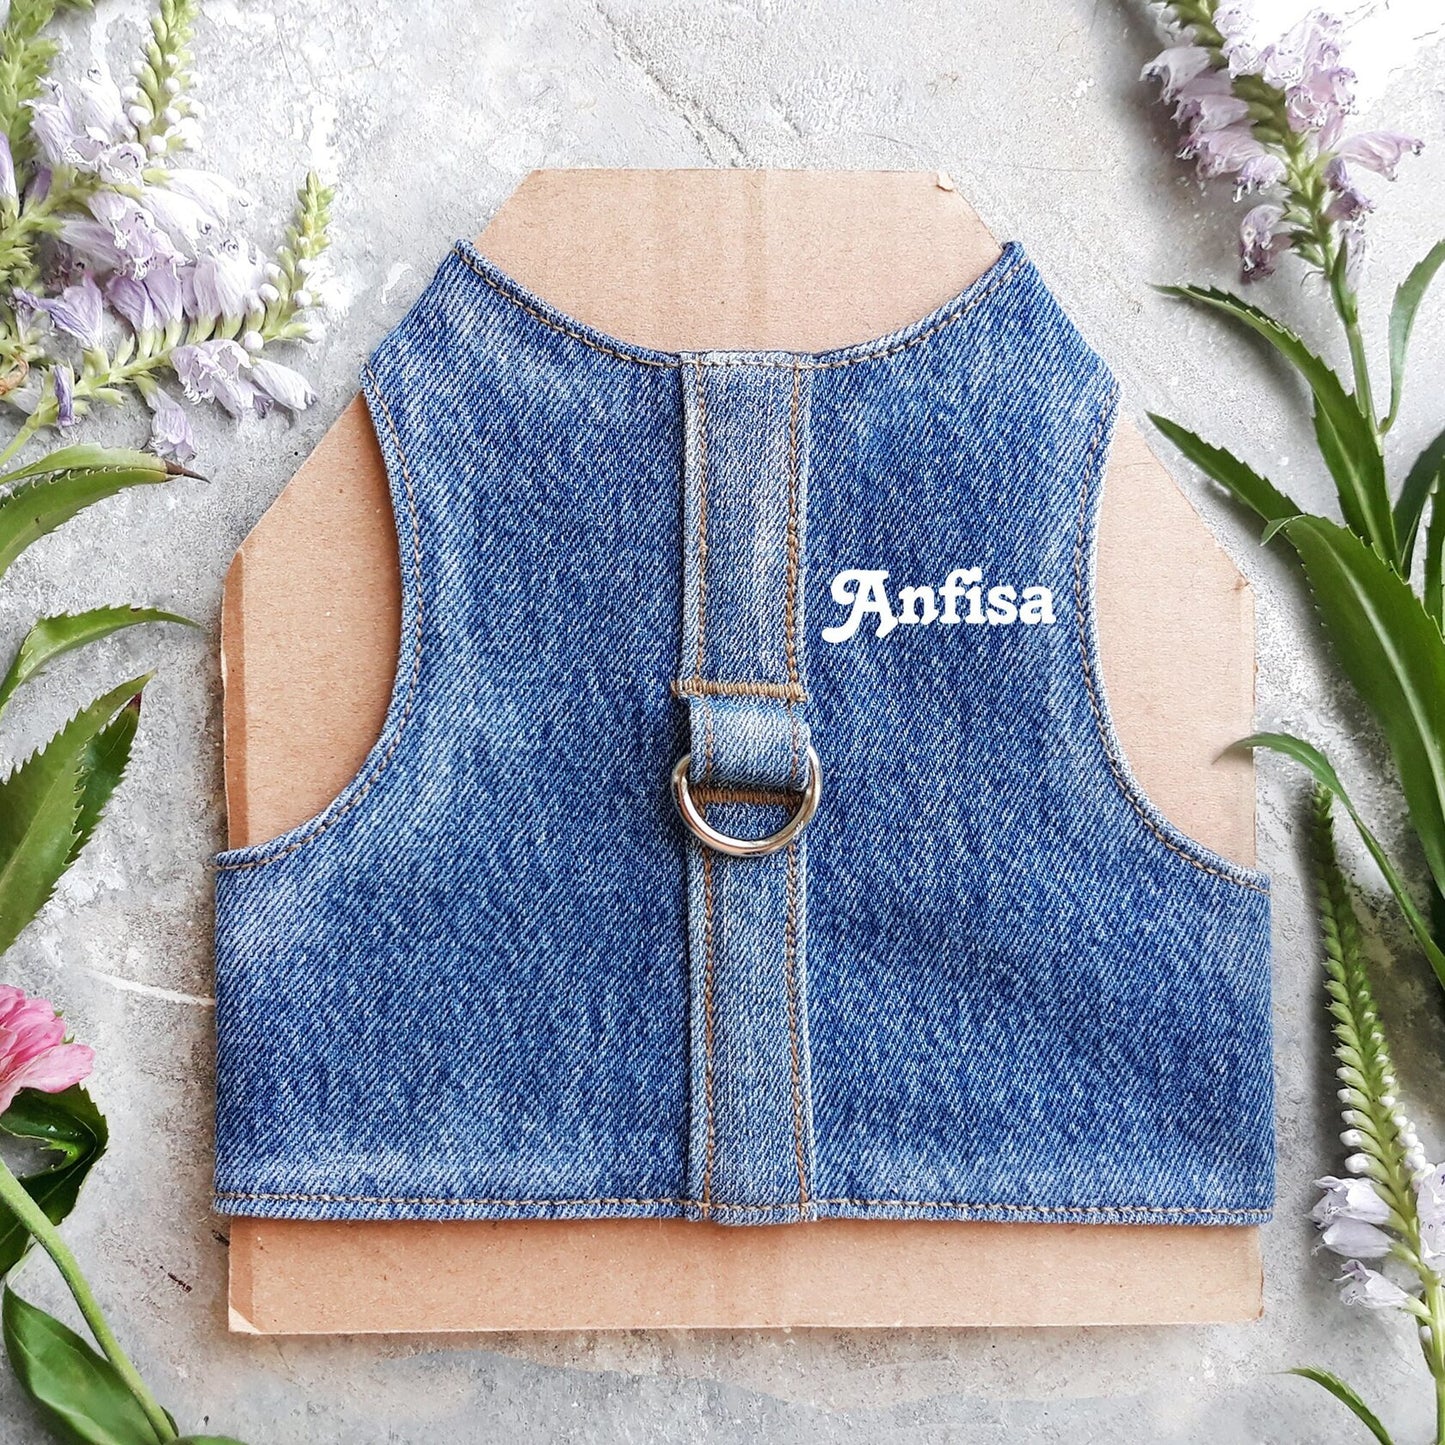 Difficult to escape upcycling denim cat harness. Personalization is available